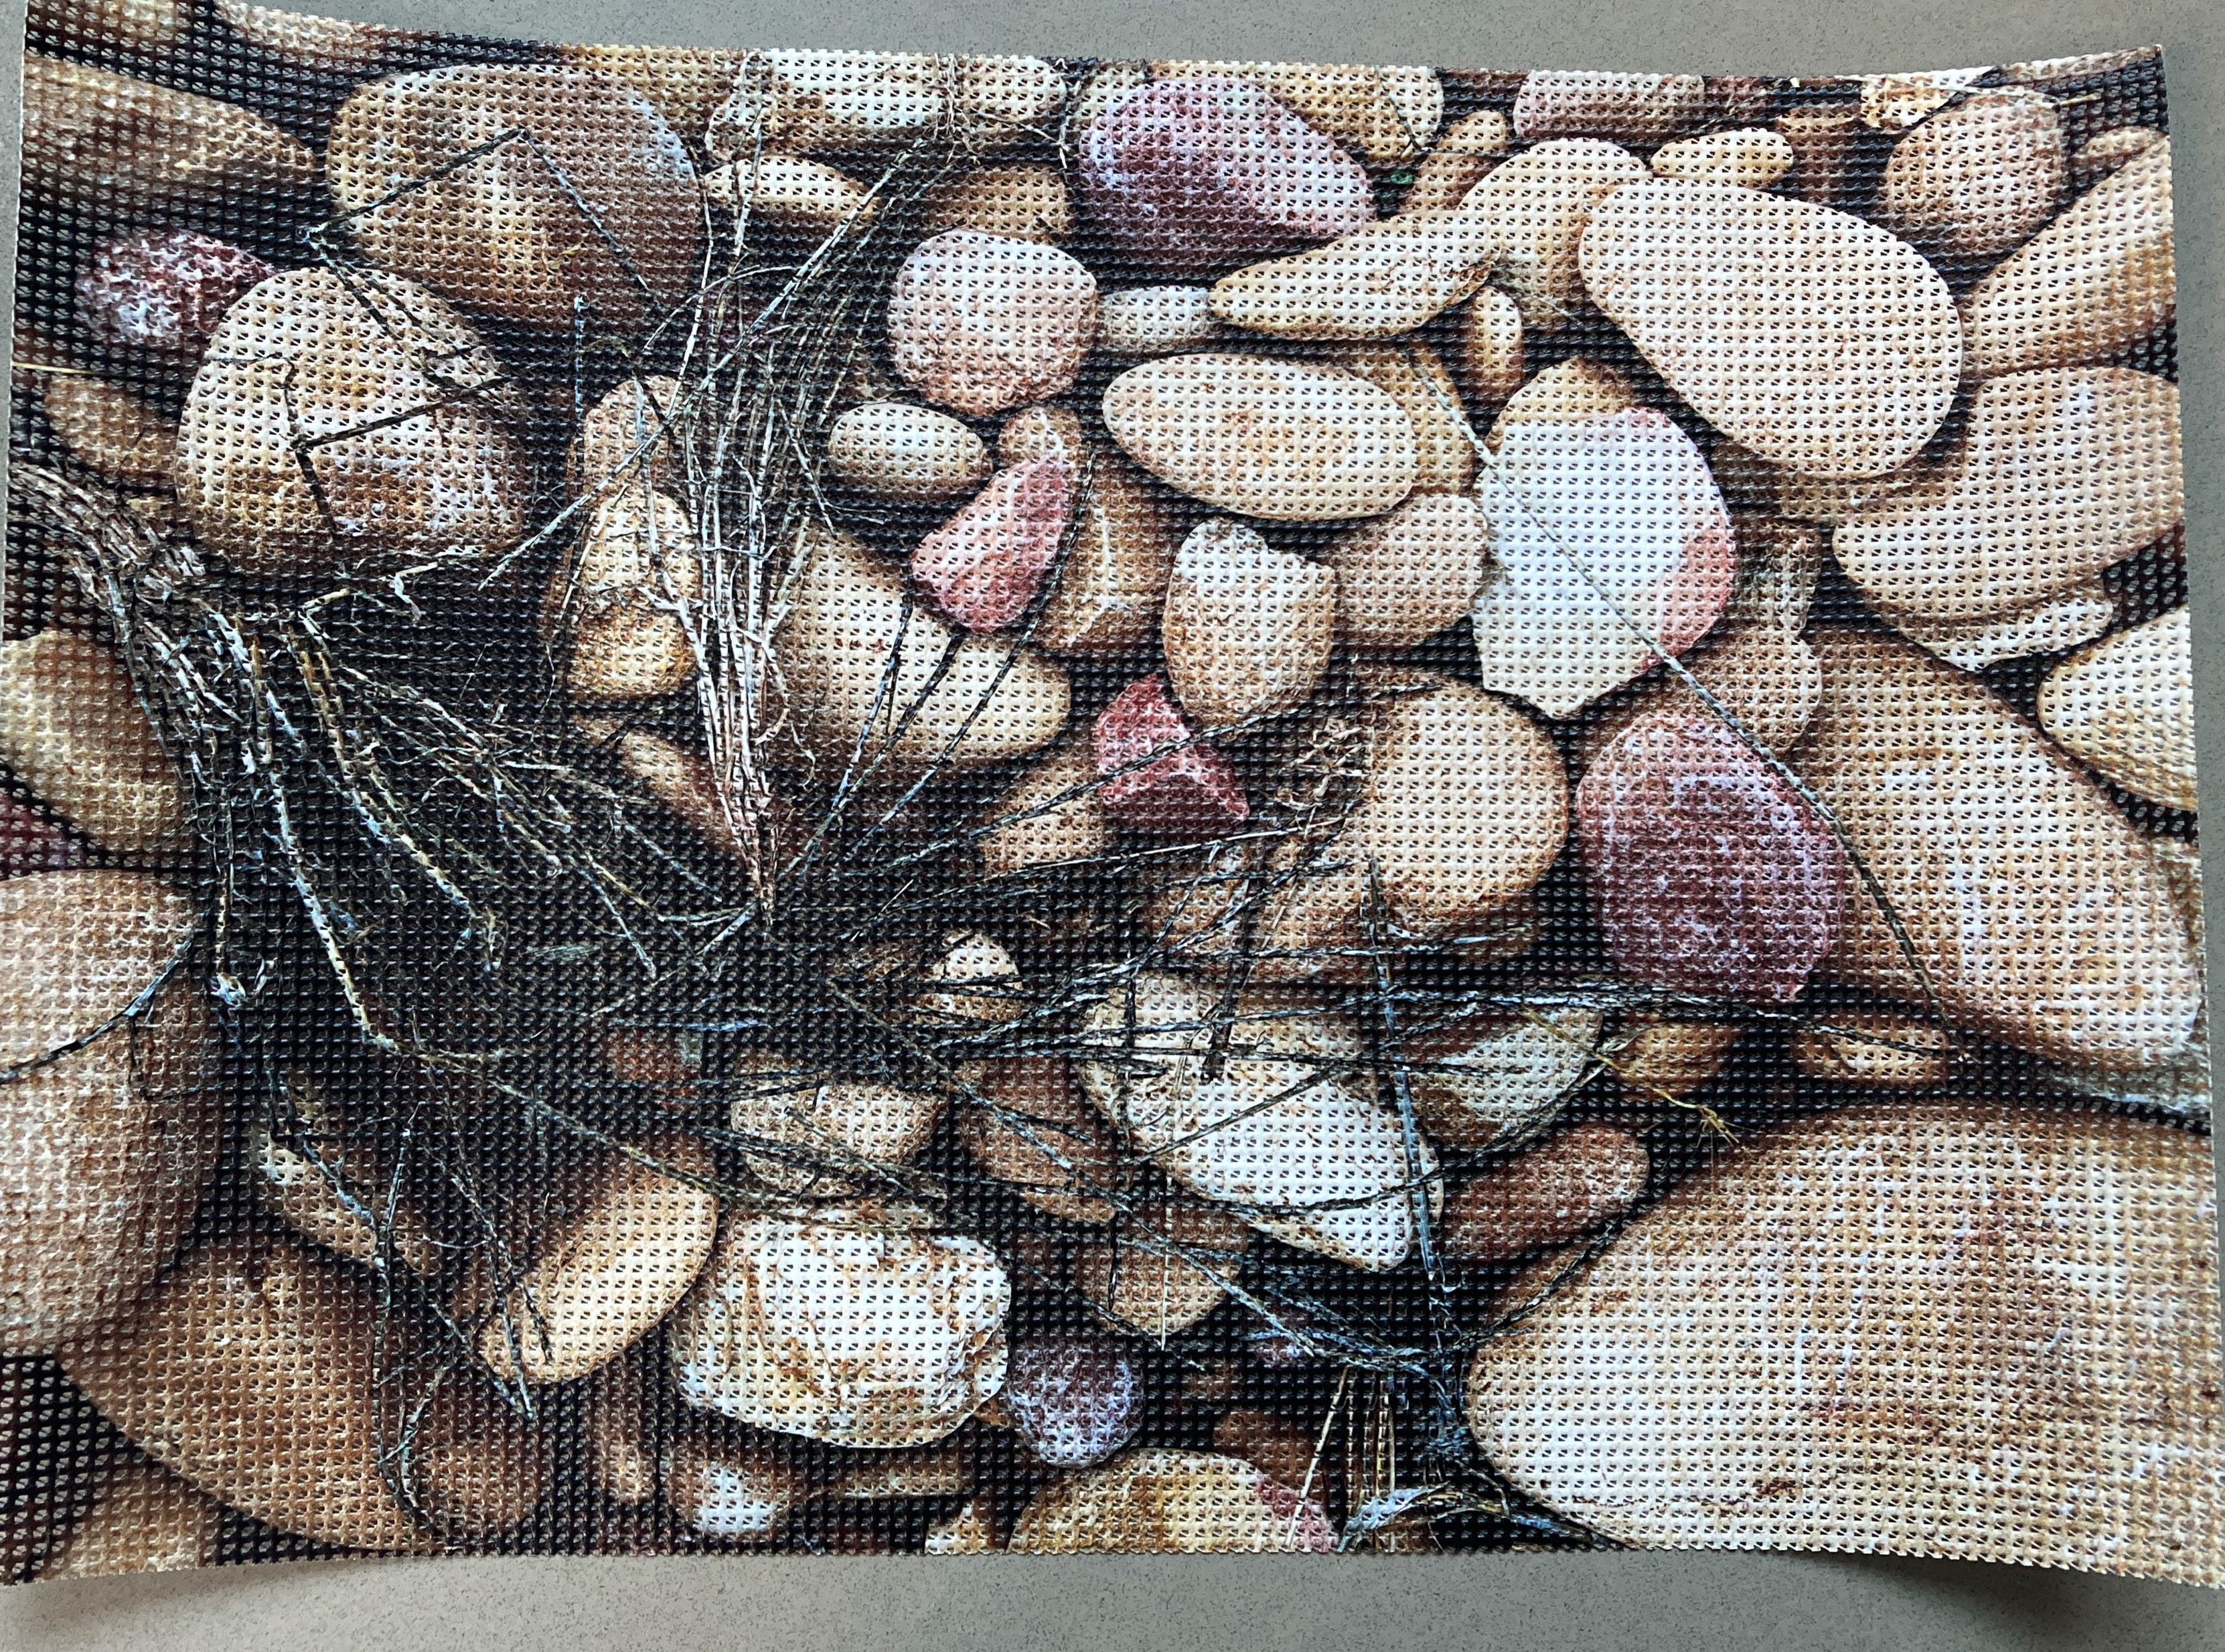 A pebble look mesh square to go into a patterned resin floor